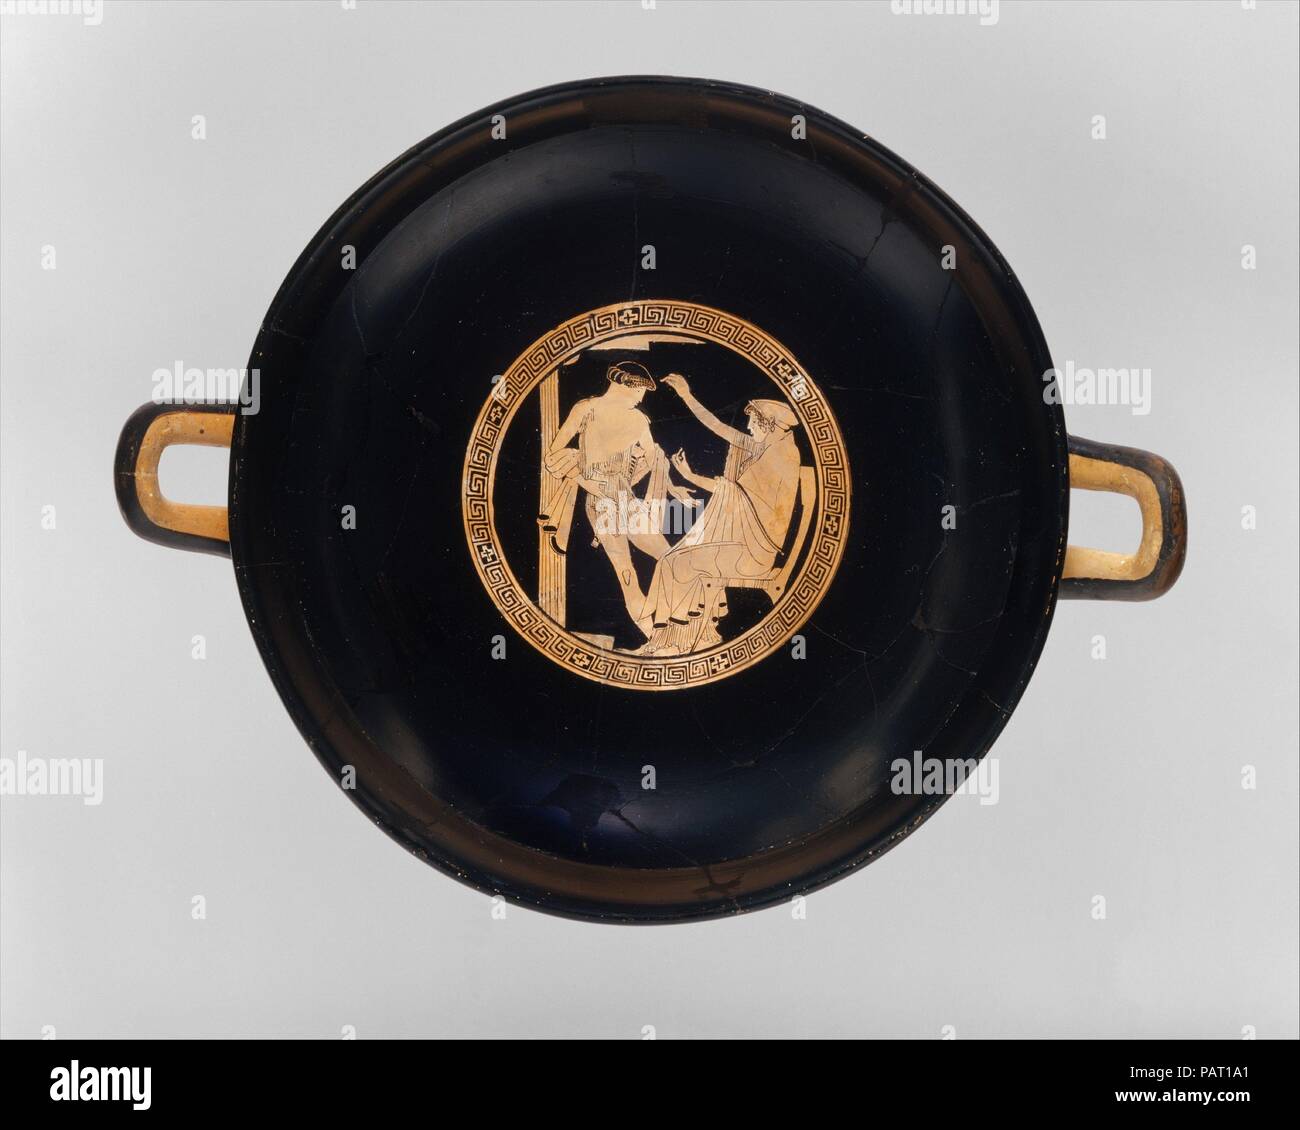 Terracotta kylix (drinking cup). Culture: Greek, Attic. Dimensions: H. 5 3/16 in. (13.2 cm)  width with handles 15 3/8 (39.1 cm)  diameter  12 1/16 in. (30.7 cm). Date: ca. 480 B.C..  Interior and exterior, Theseus in Poseidon's undersea palace and his arrival in Athens  The subject of the decoration is elucidated in a poem by Bacchylides, active in the fifth century B.C. On the interior and one side of the exterior, Theseus, who is bound for Crete to kill the Minotaur, takes leave of his father and stepmother, Poseidon and Amphitrite. On the other side, the victorious Theseus is welcomed back Stock Photo